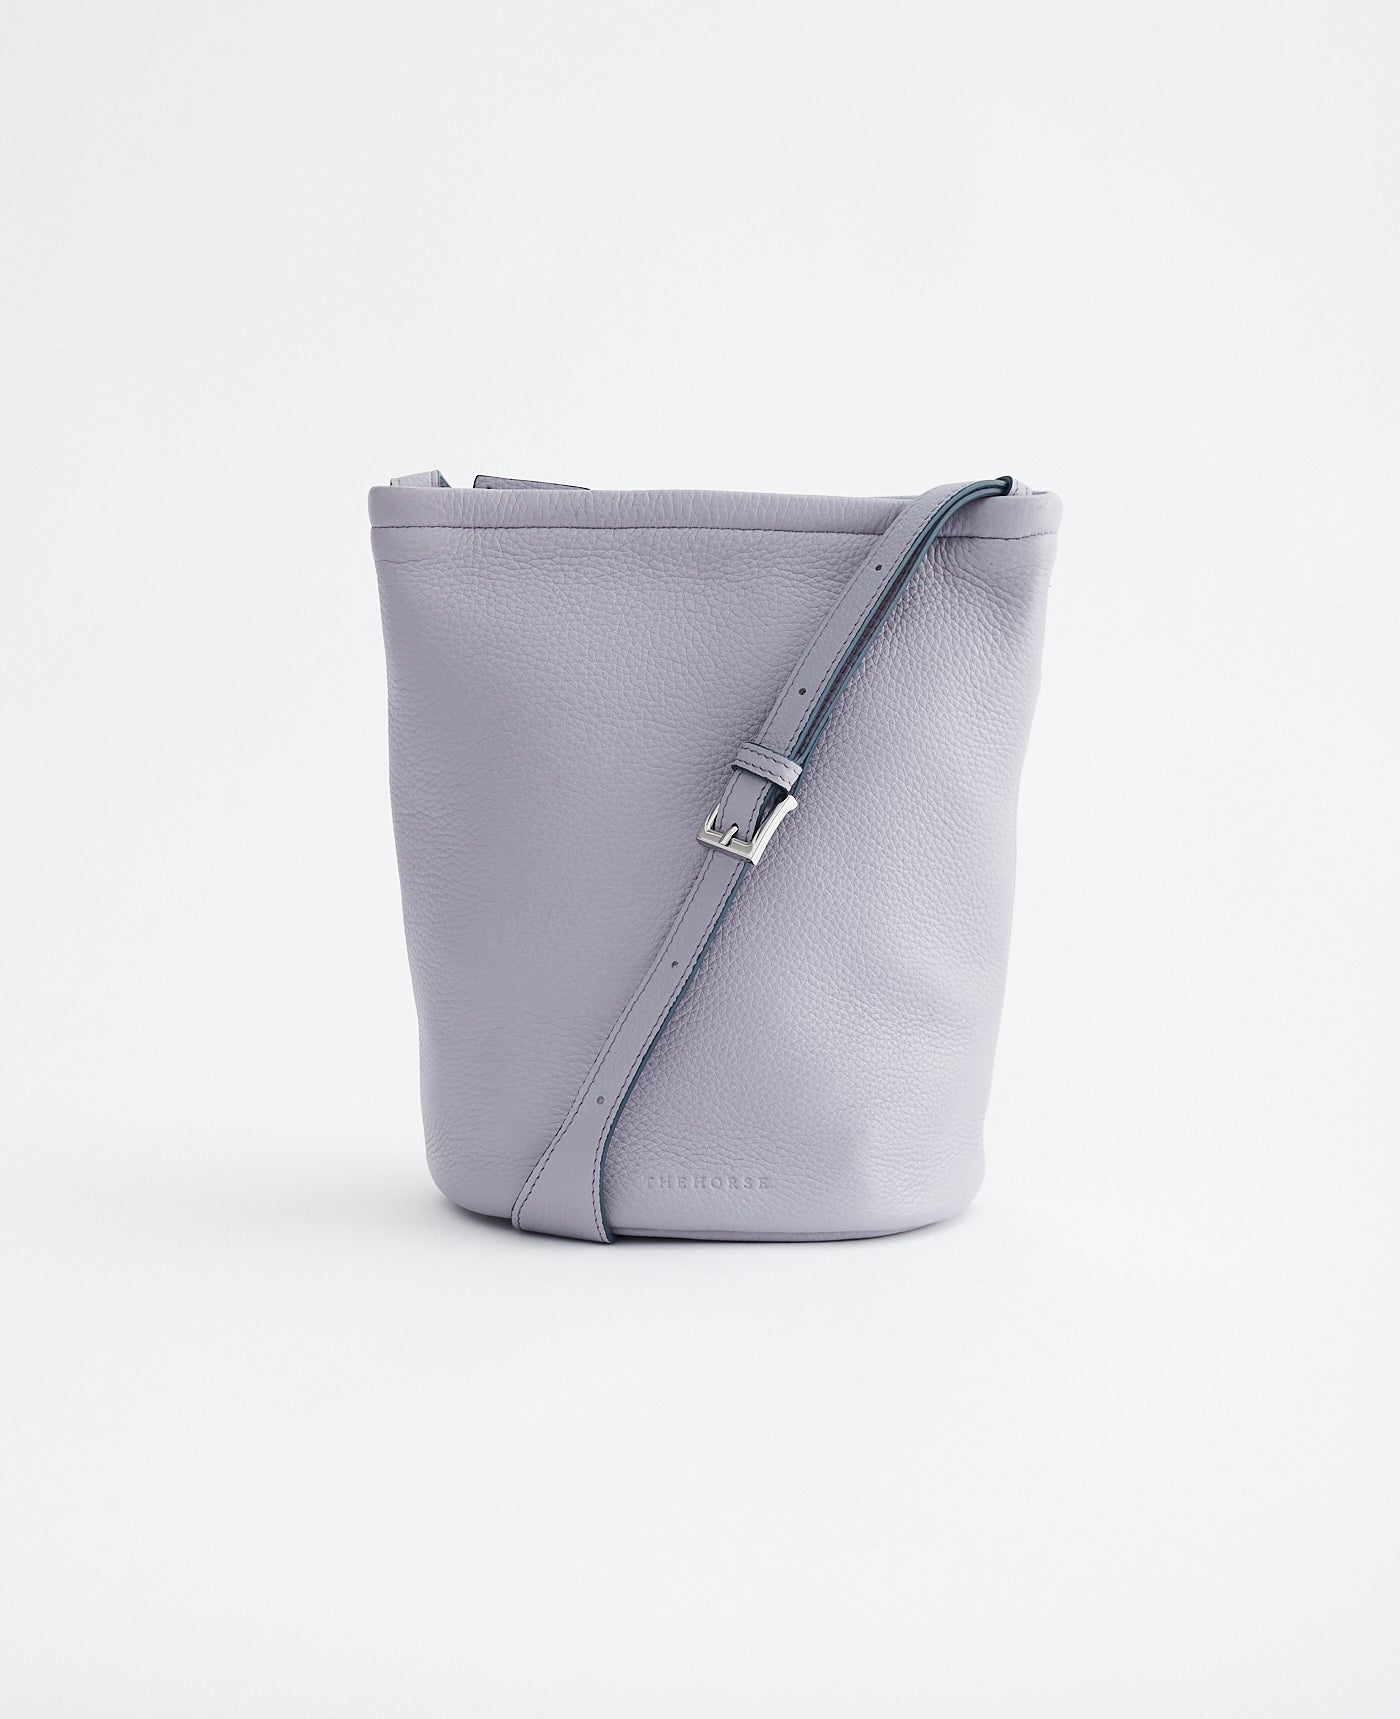 Rosa Leather Zip Bucket Bag in Violet by The Horse®